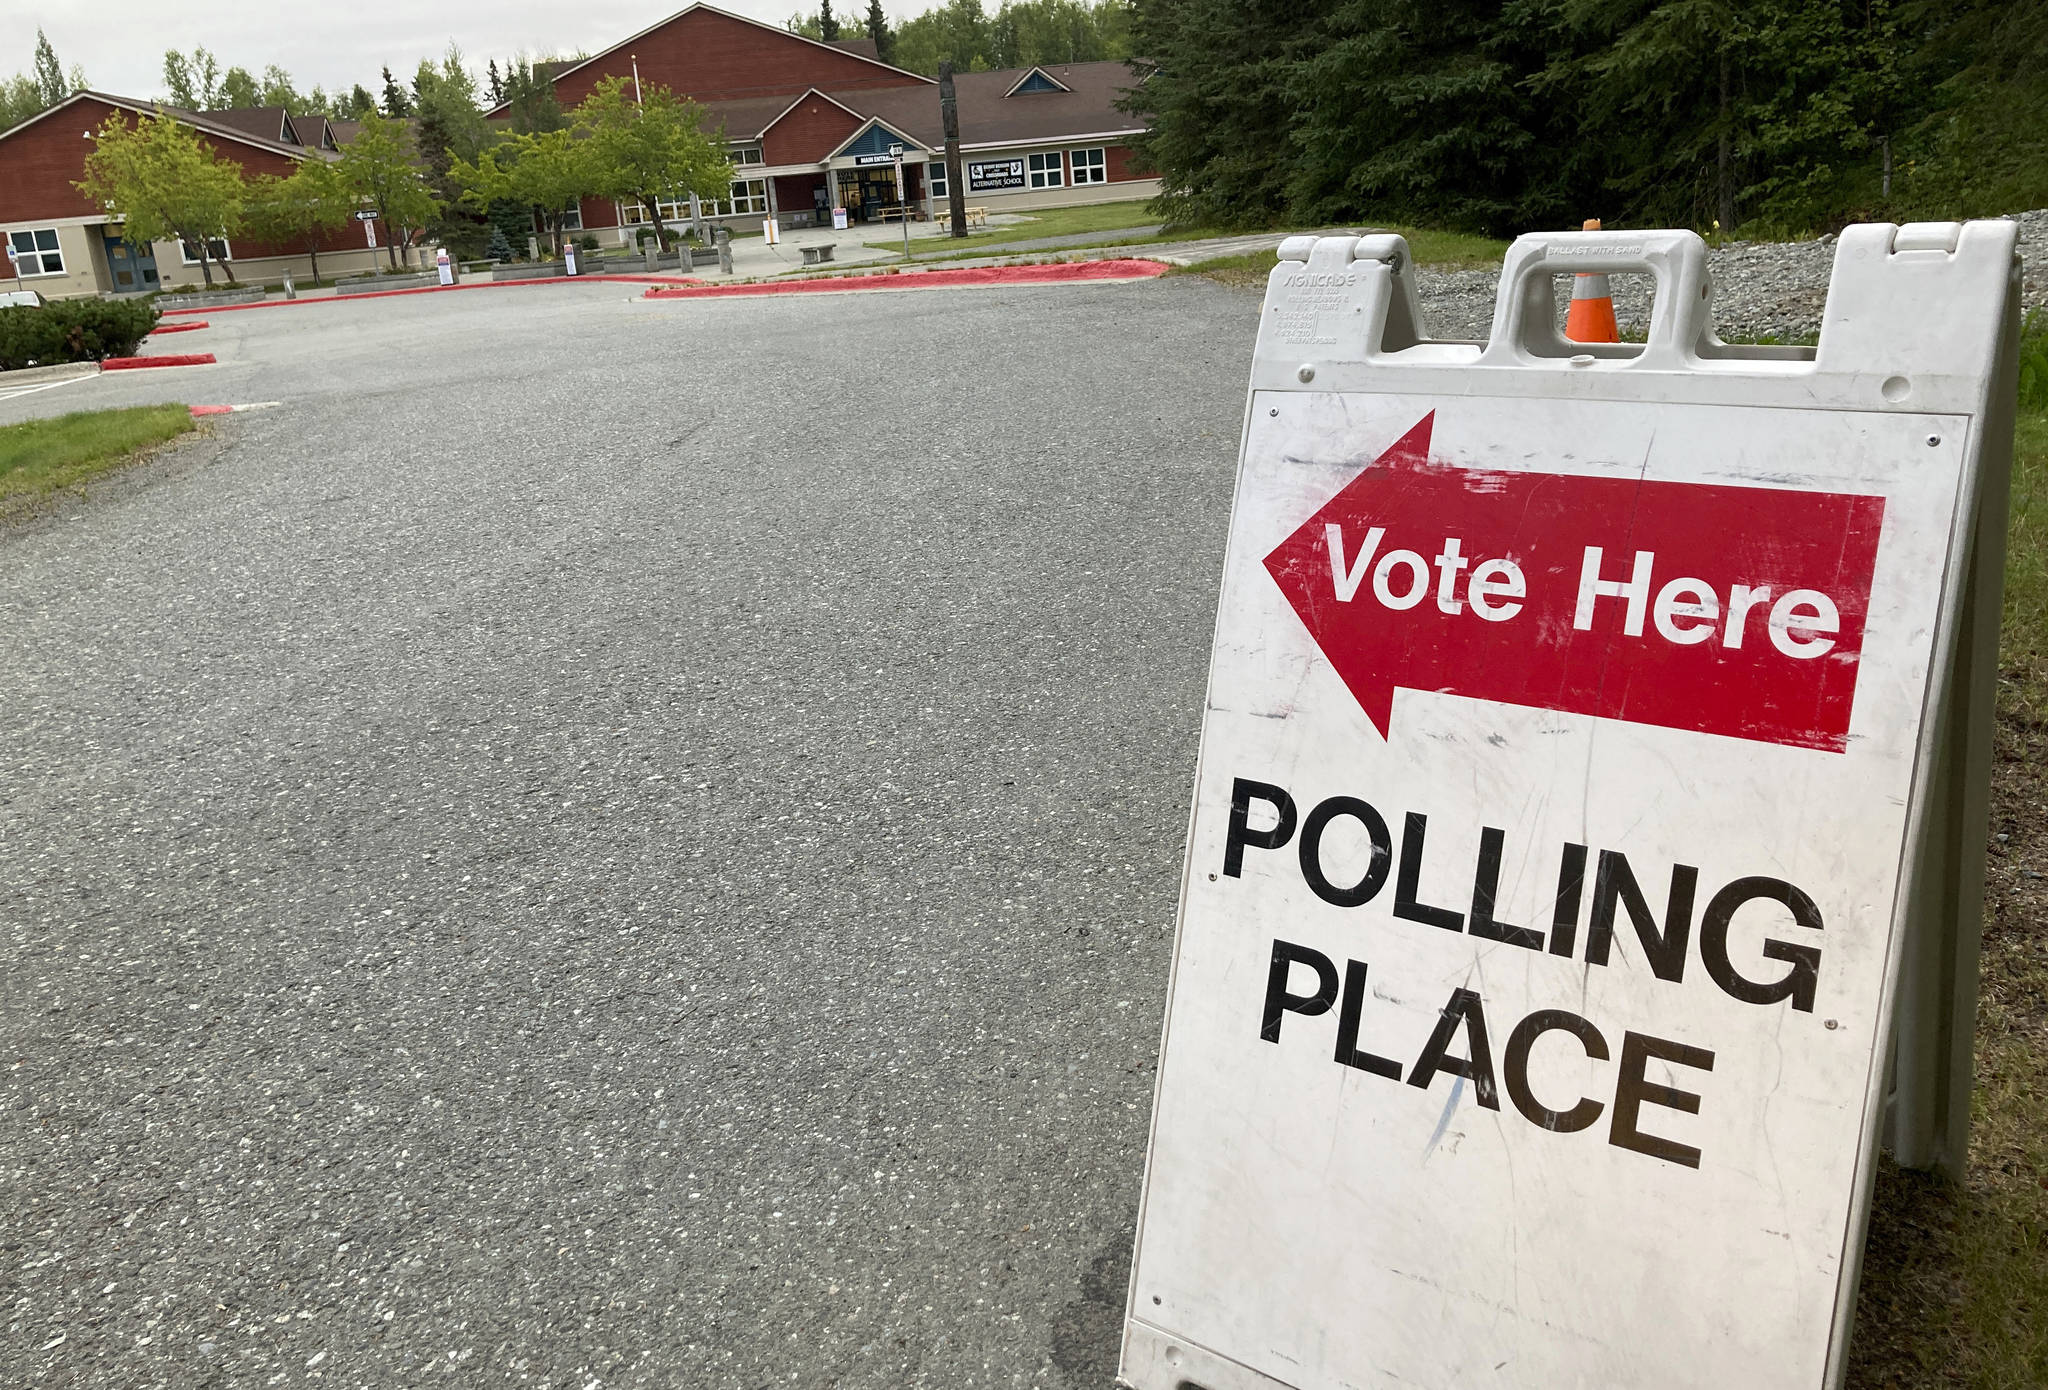 A “Vote Here” sign stands in the driveway outside Benny Benson Elementary School in Anchorage, Alaska, on Tuesday, Aug. 18, 2020. The Alaska Primary election is held Tuesday, when key races included the U.S. Senate, U.S. House and legislative races. (AP Photo/Mark Thiessen)